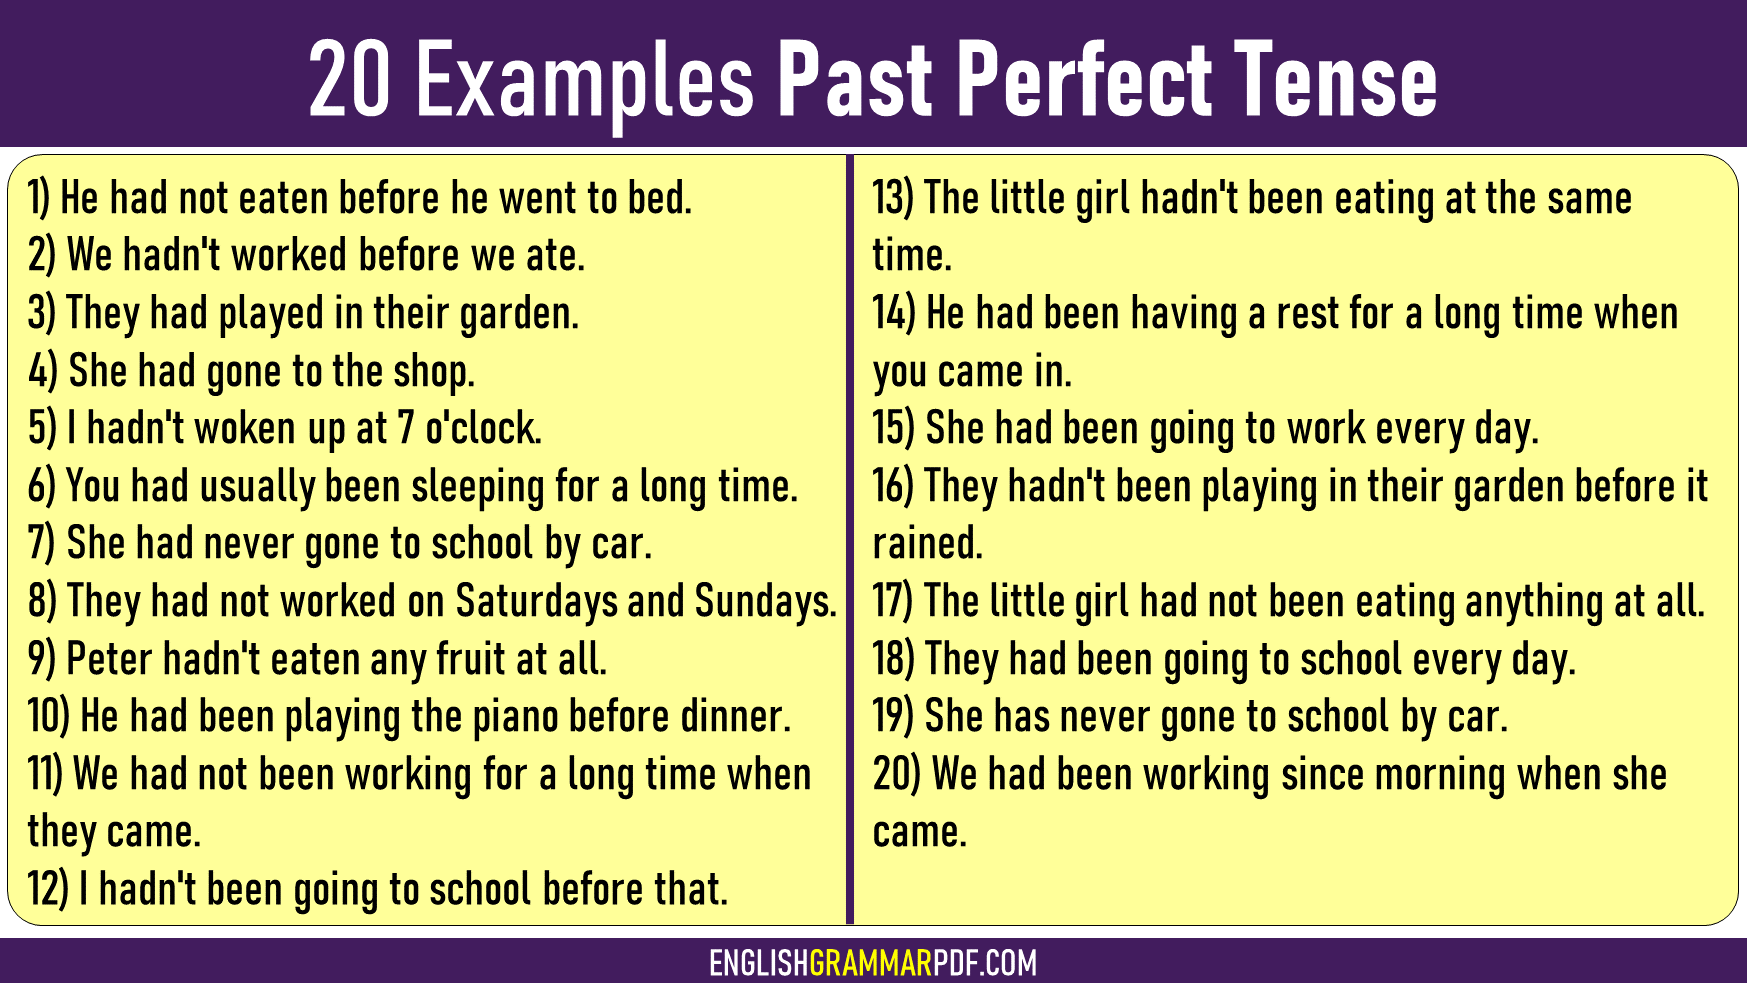 Give Five Examples Of Past Perfect Tense